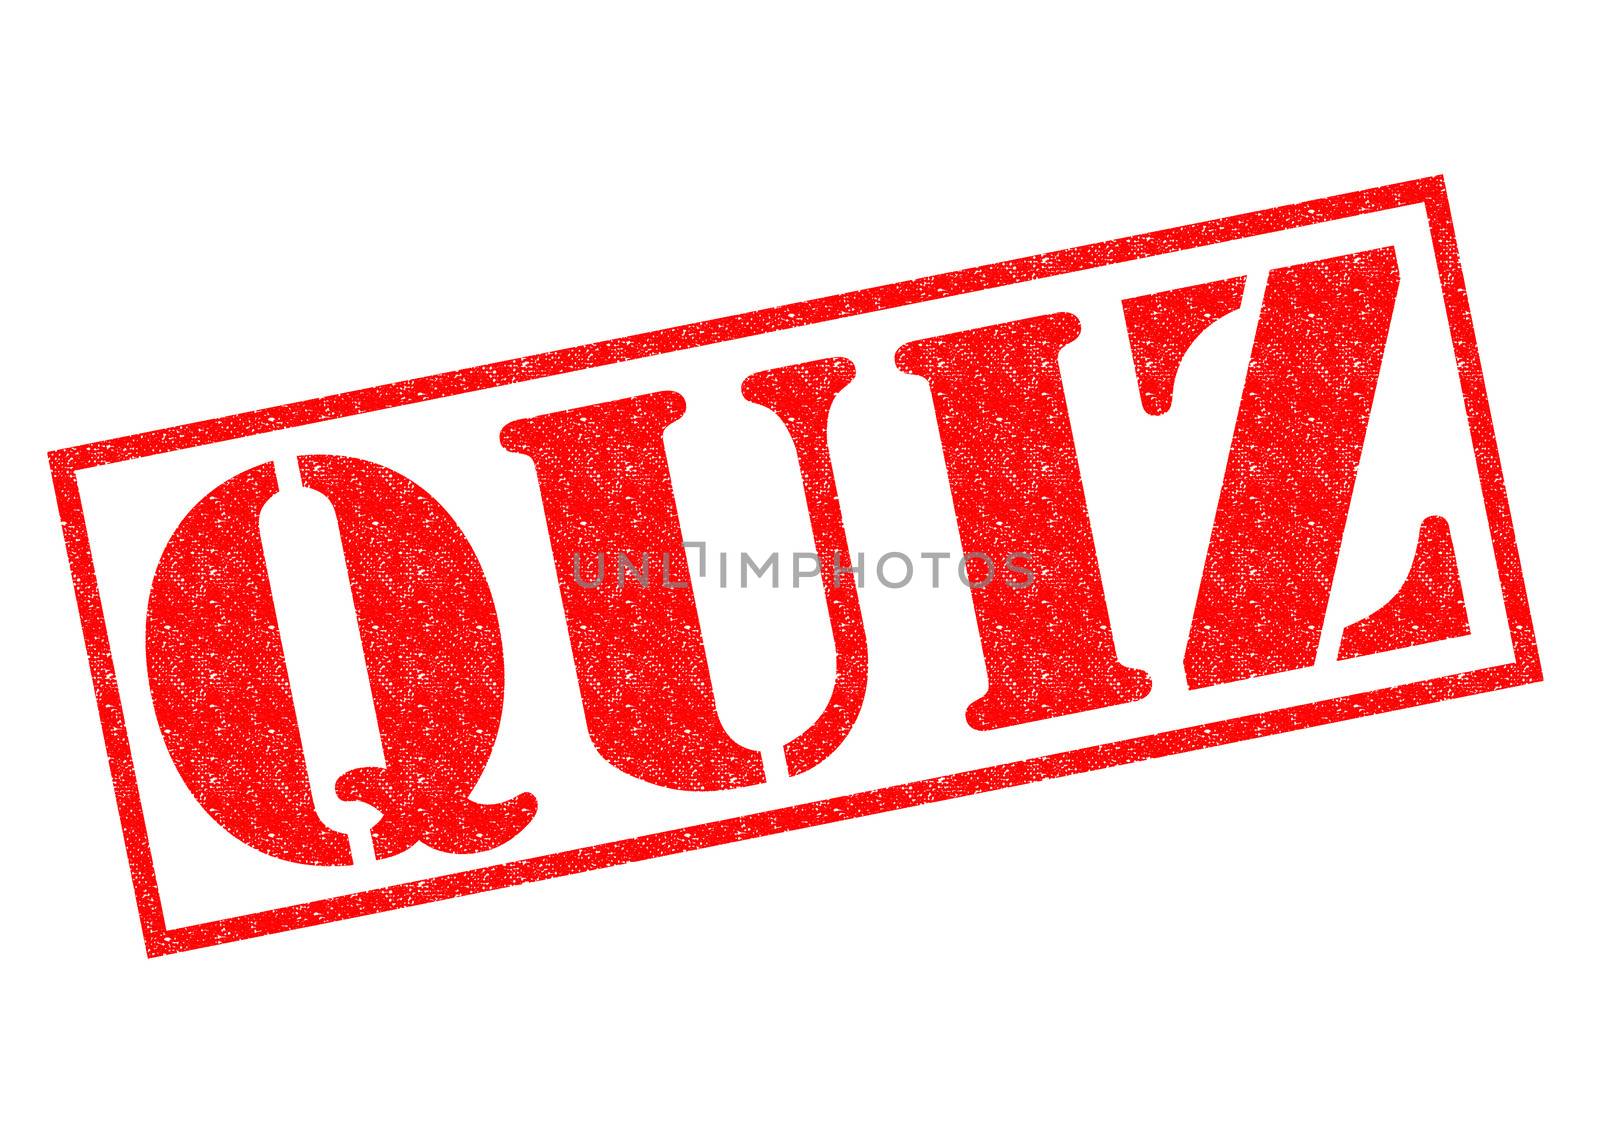 QUIZ red Rubber Stamp over a white background.